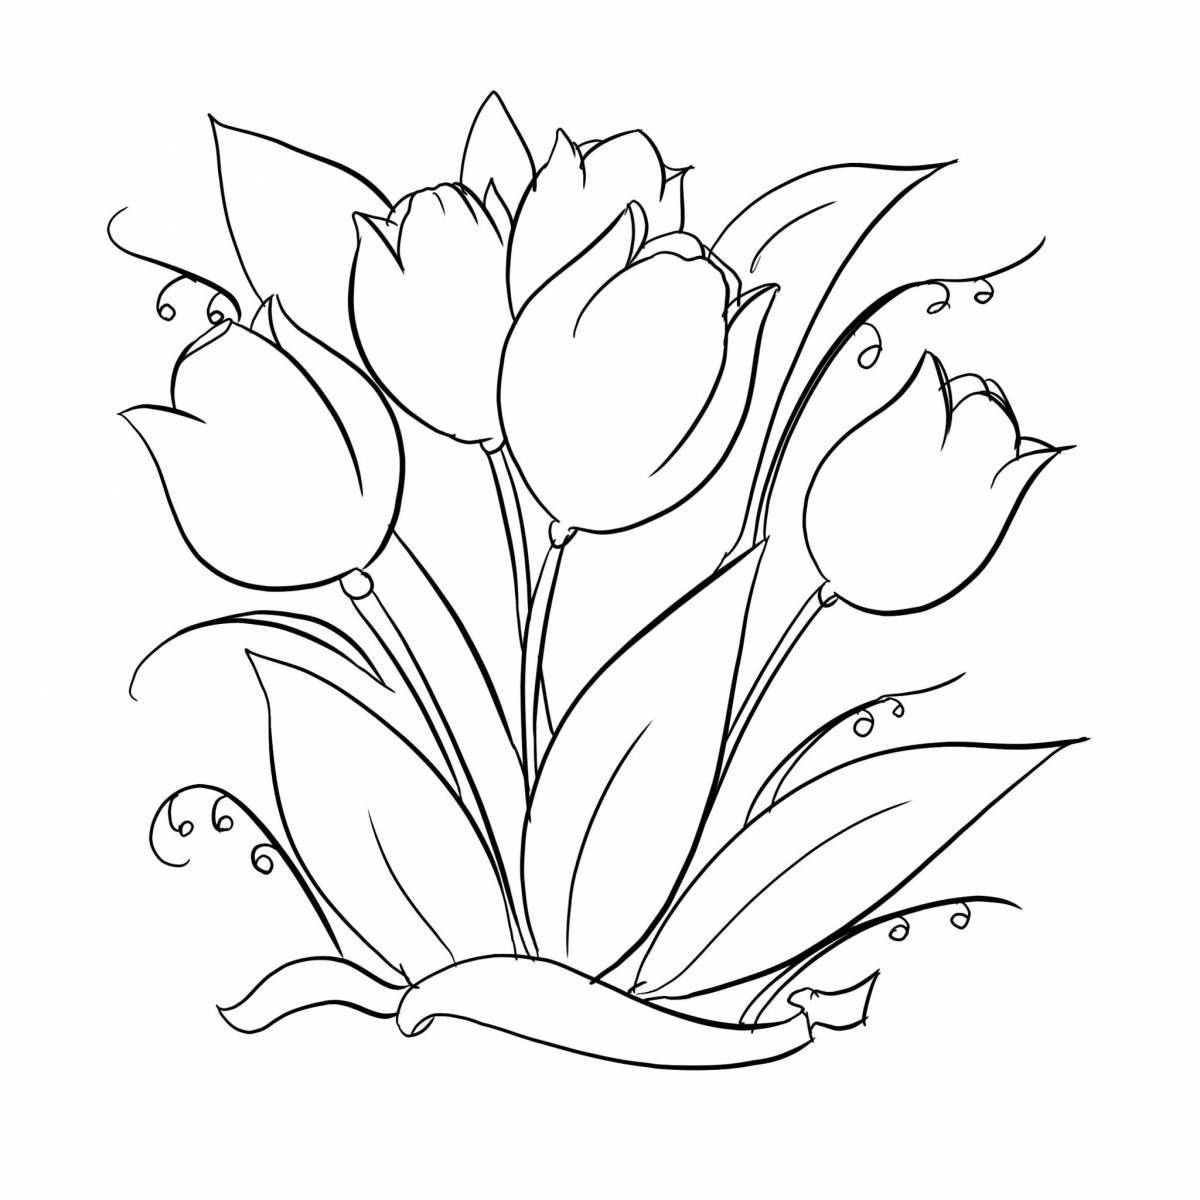 Delightful spring tulips coloring book